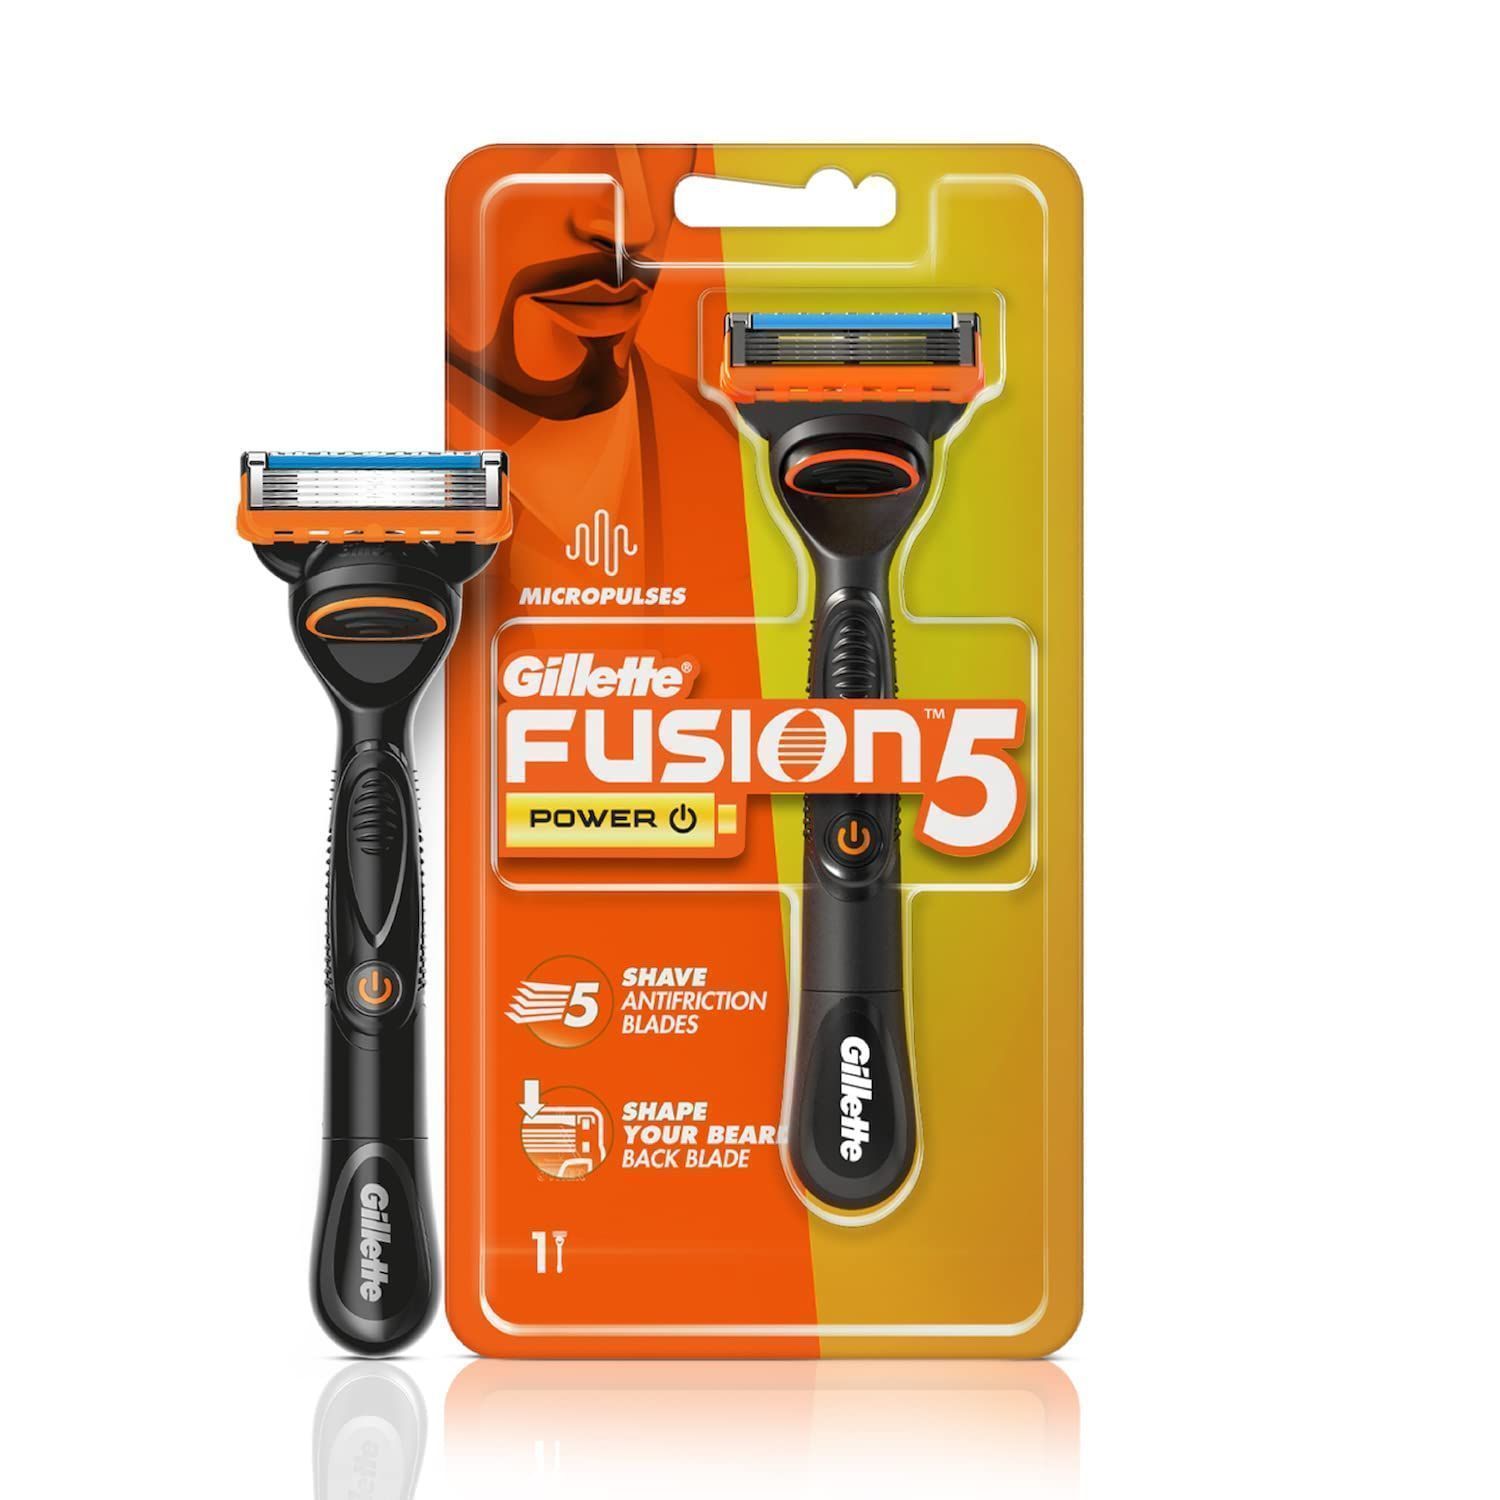 Gillette Fusion Power Razor Complete Shaving Corporate Gift Pack For Men With 4 Cartridge